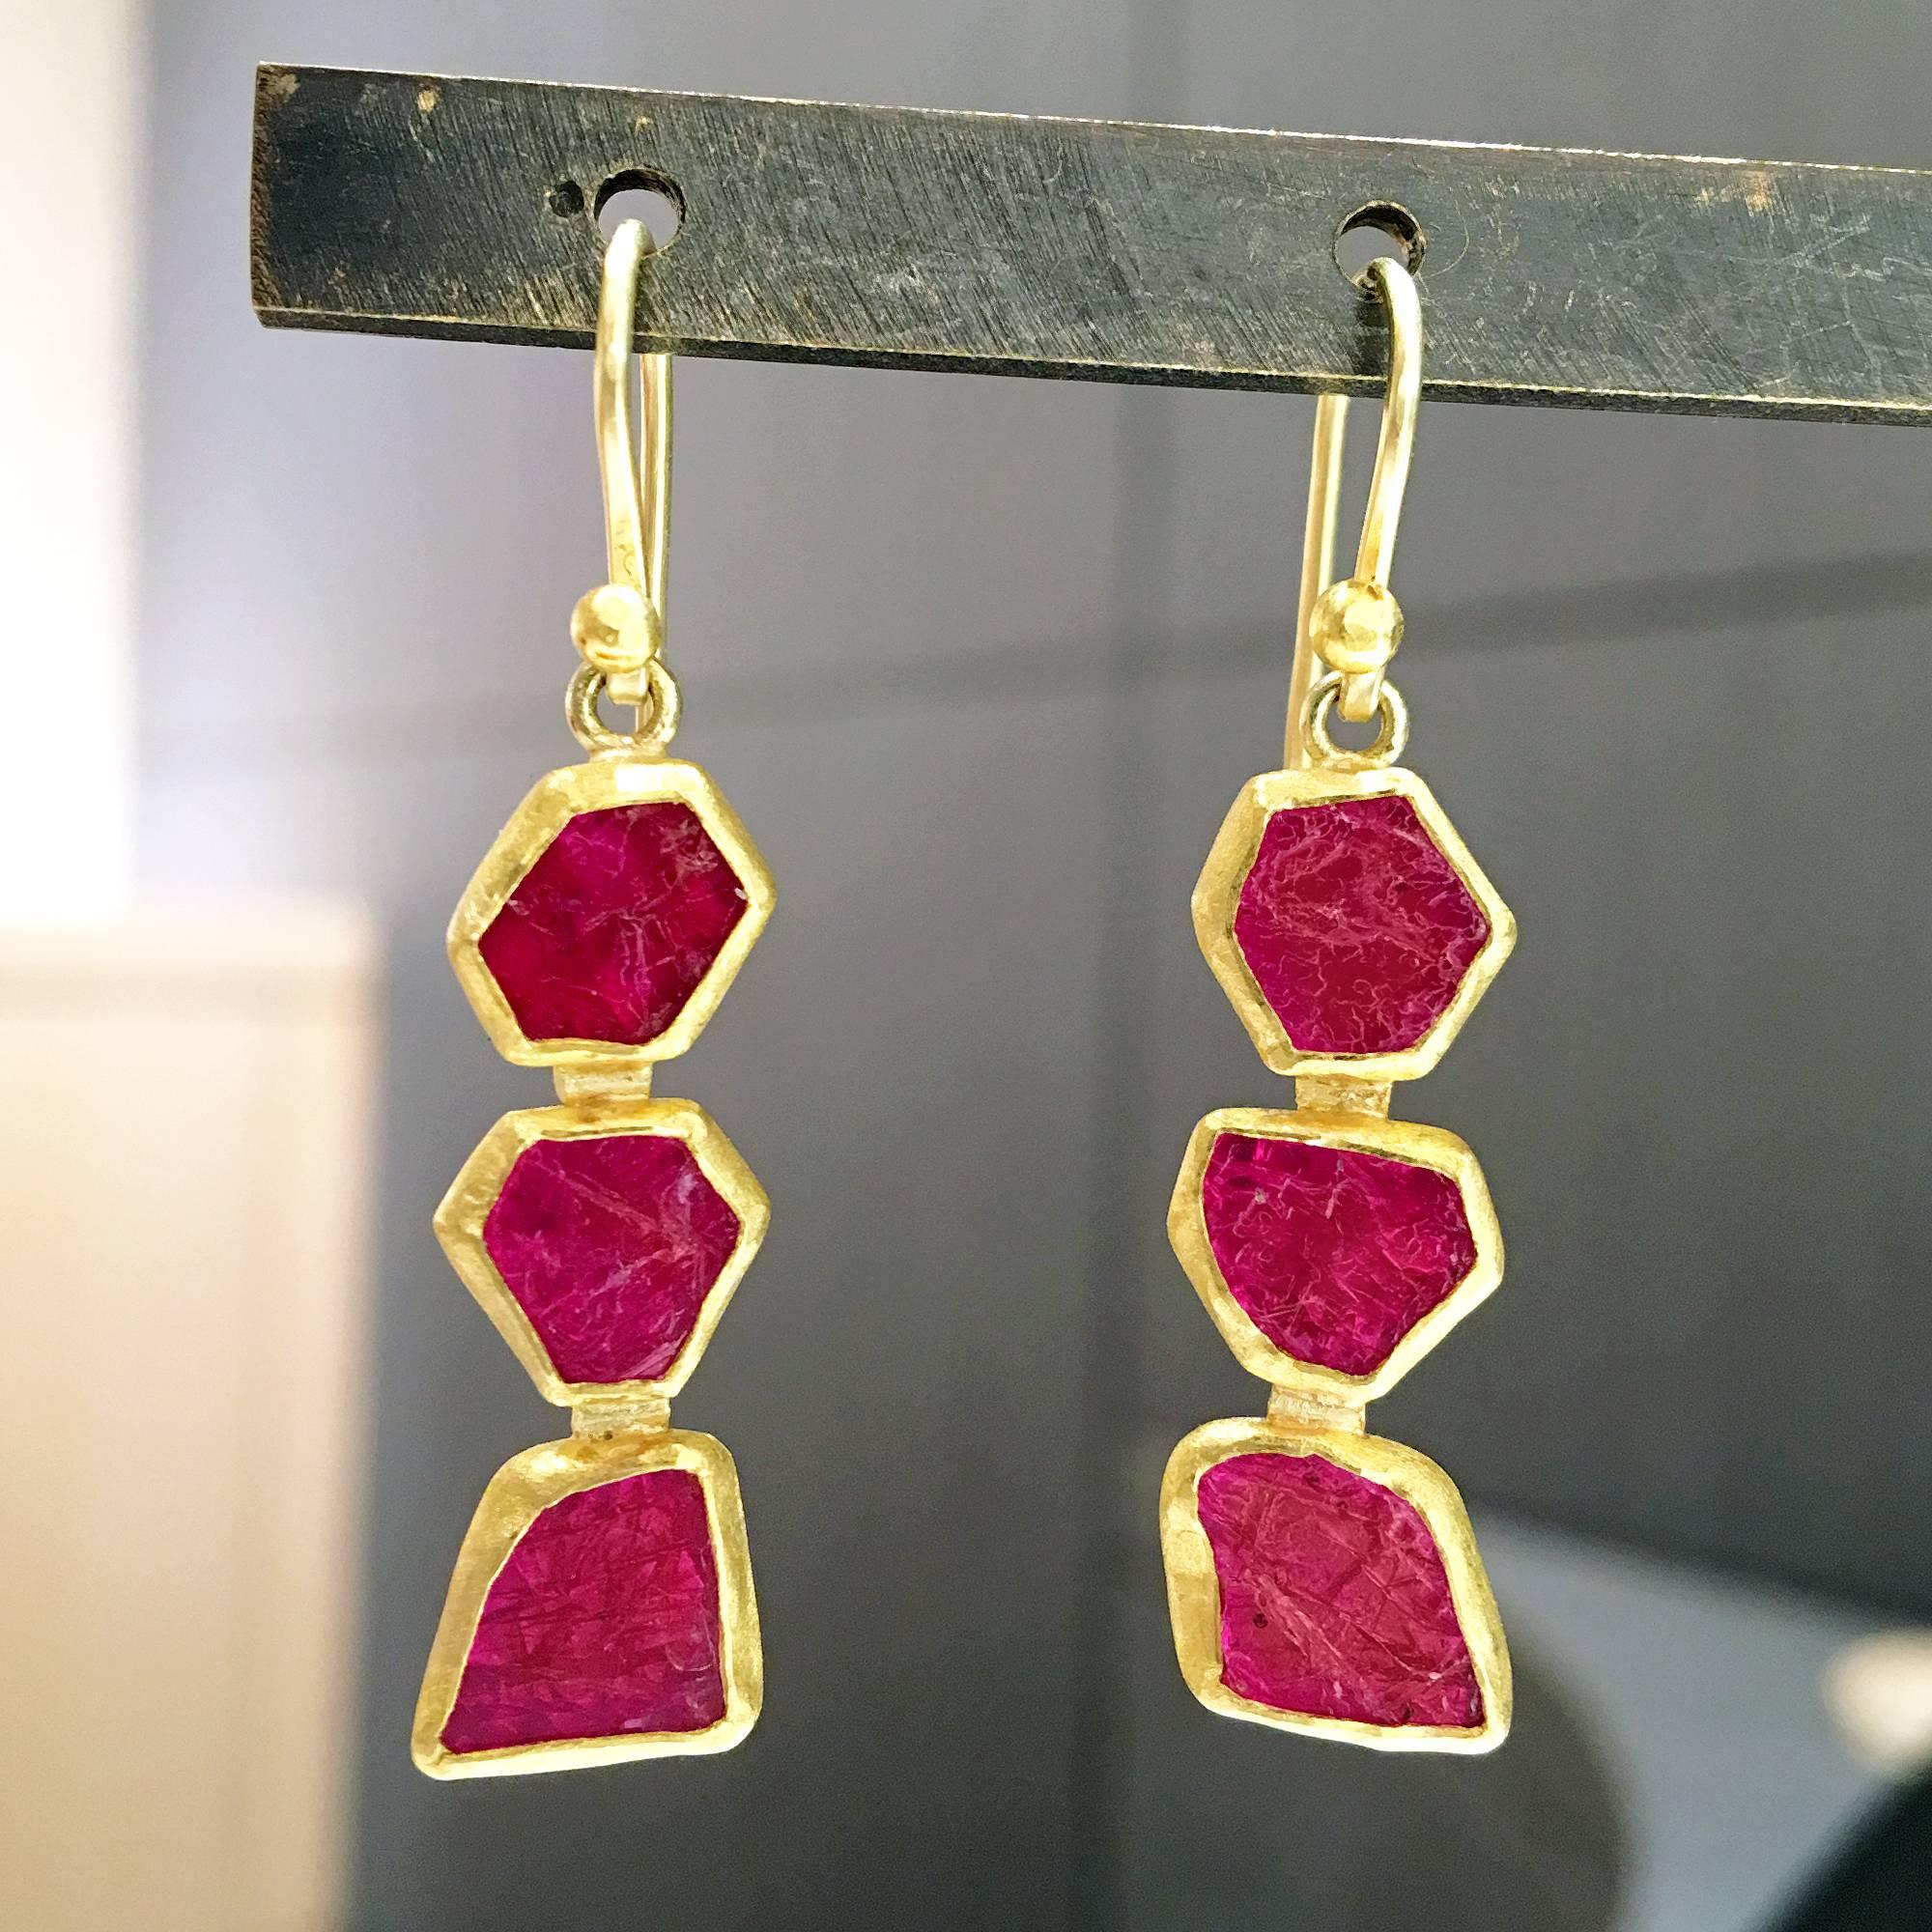 One of a Kind Dangle Earrings handcrafted by Petra Class in her signature matte finished 22k yellow gold featuring six polished deep red ruby crystals totaling 6.3 carats and attached to 18k yellow gold wires. Stamped and hallmarked PC / 22k / 18k /